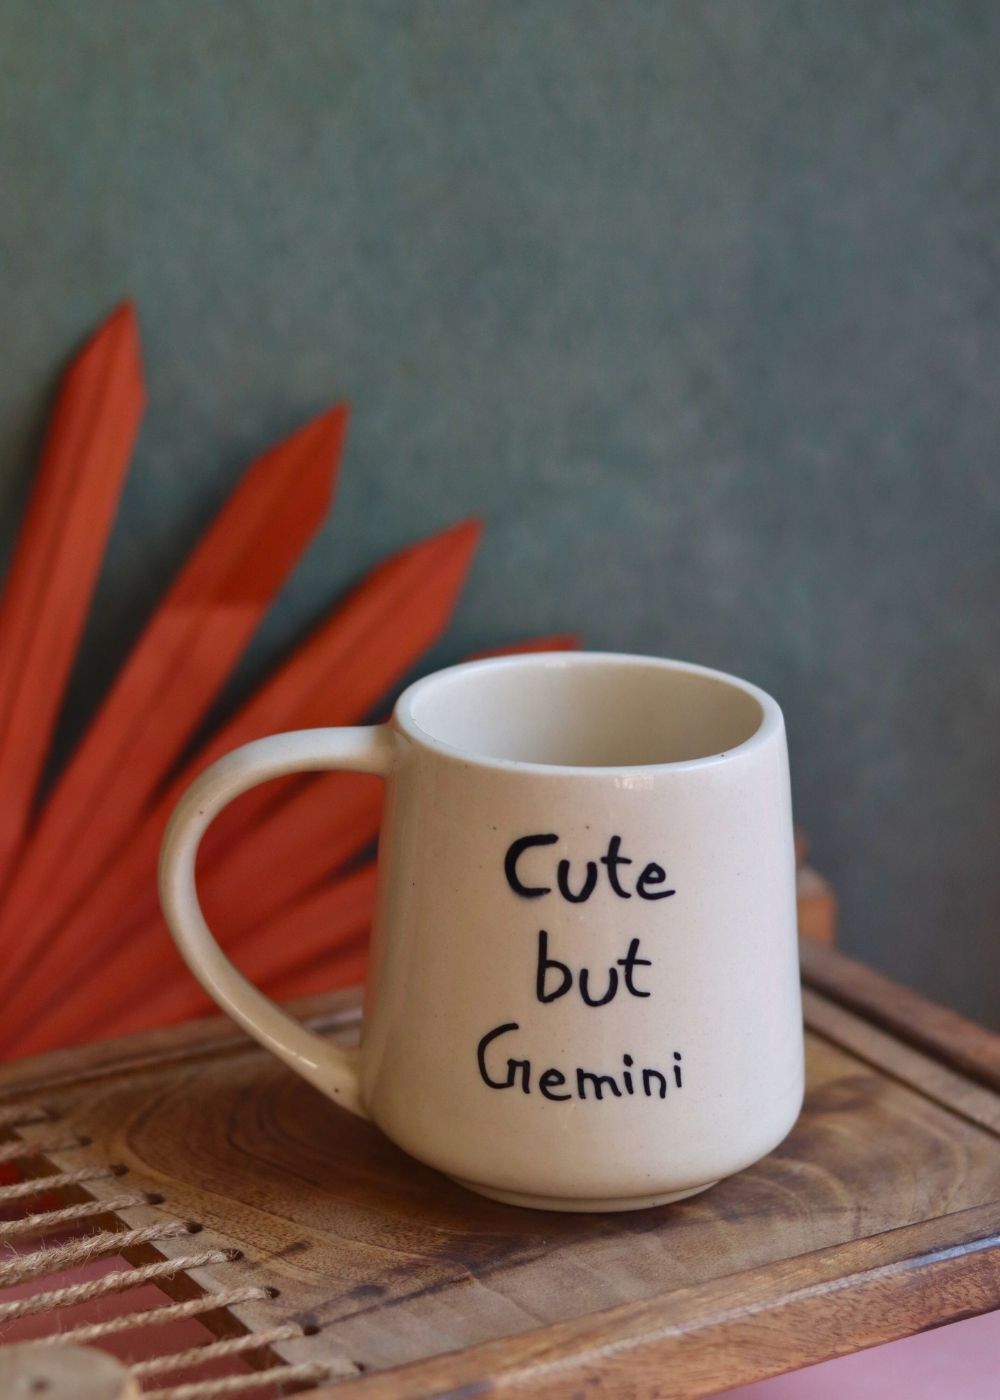 cute but gemini mug for your daily coffee routine 